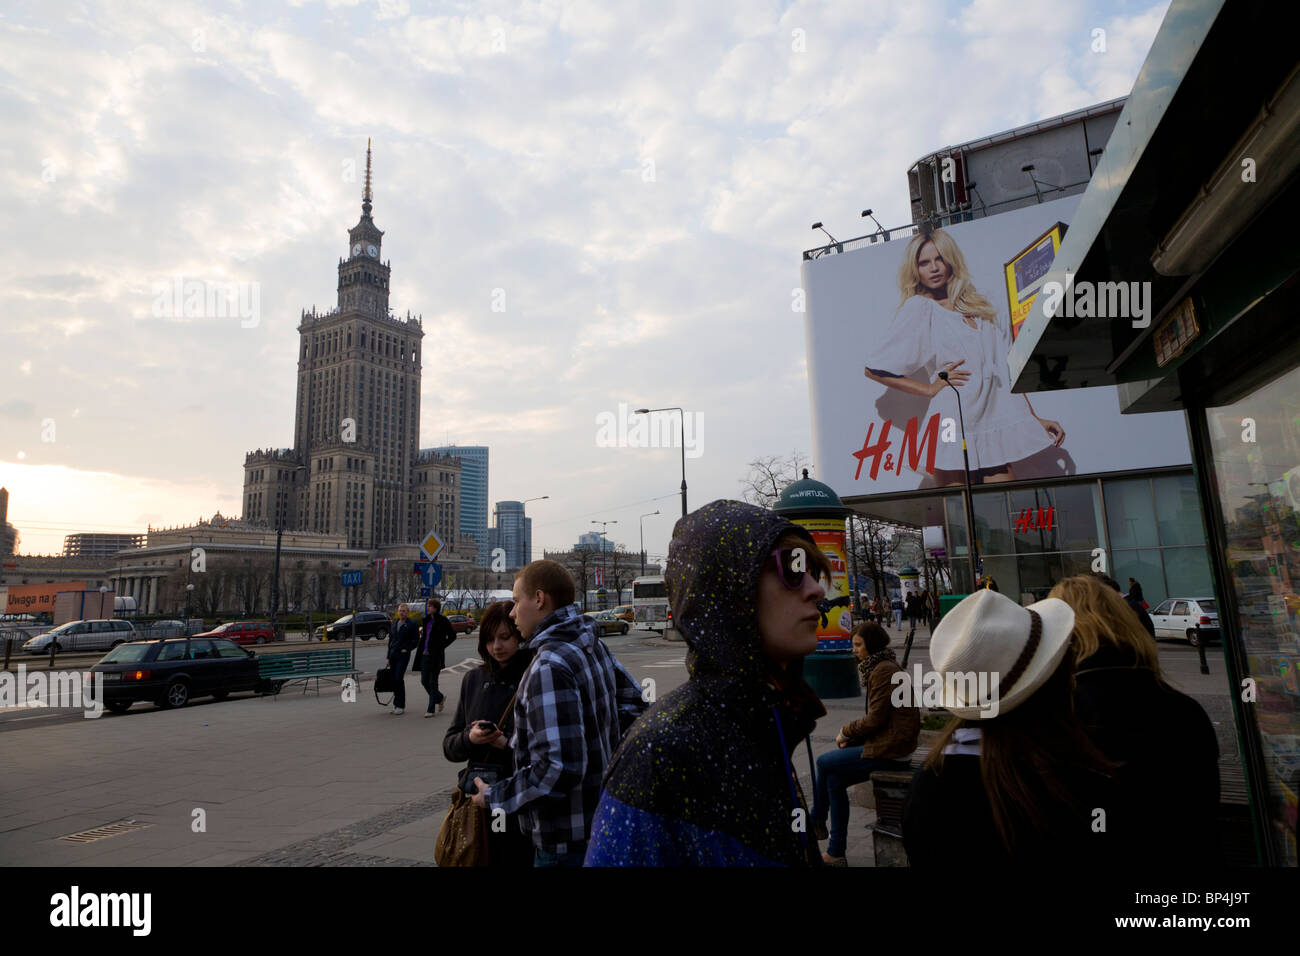 Warsaw Poland Billboard Advertising High Resolution Stock Photography and  Images - Alamy